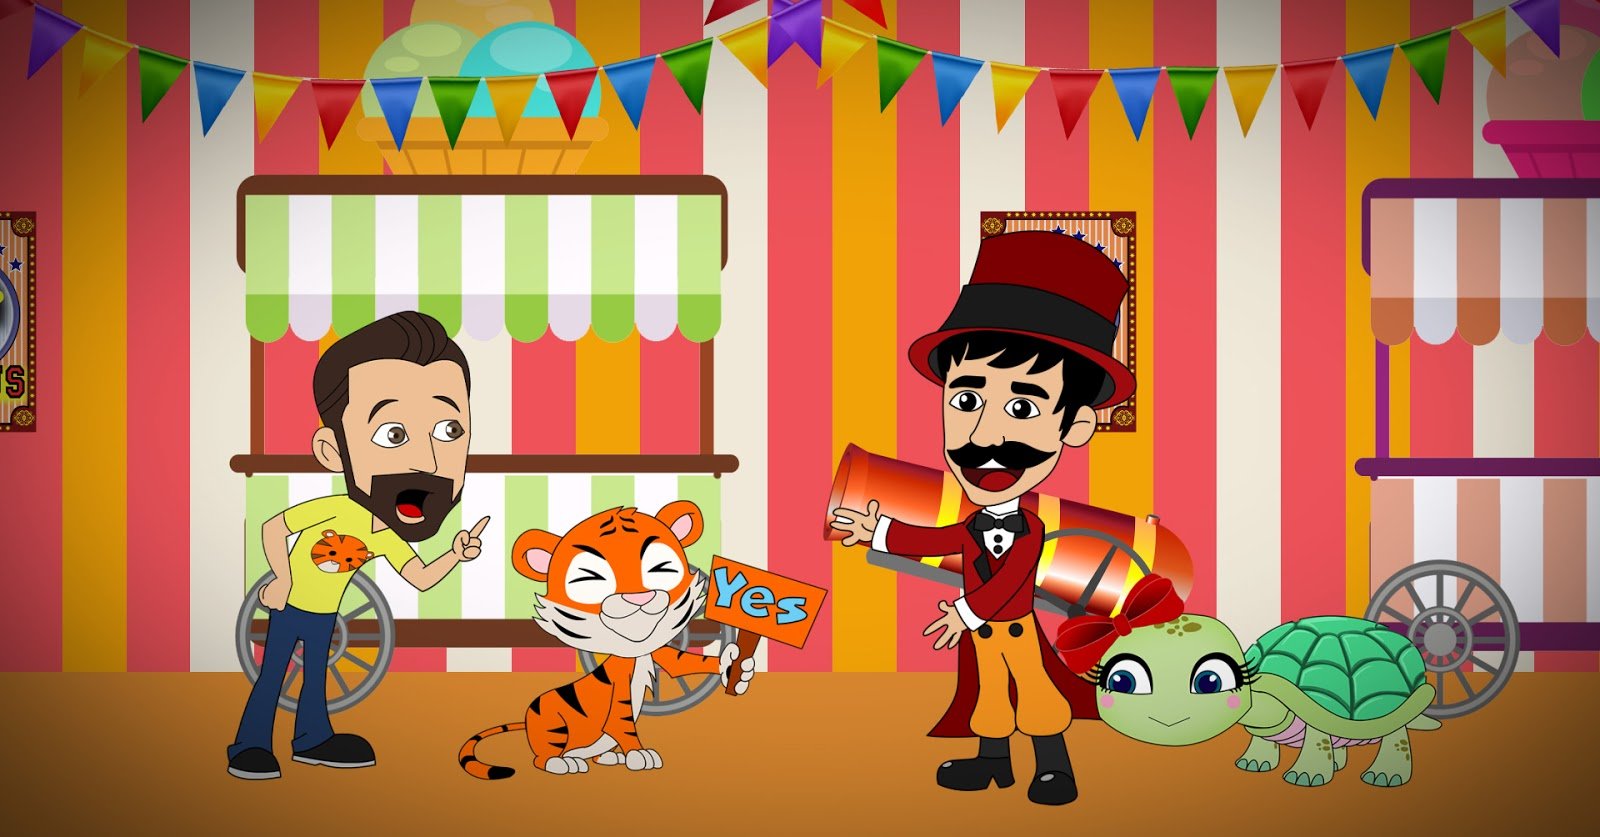 circus-themed episode | Tiger and Tim